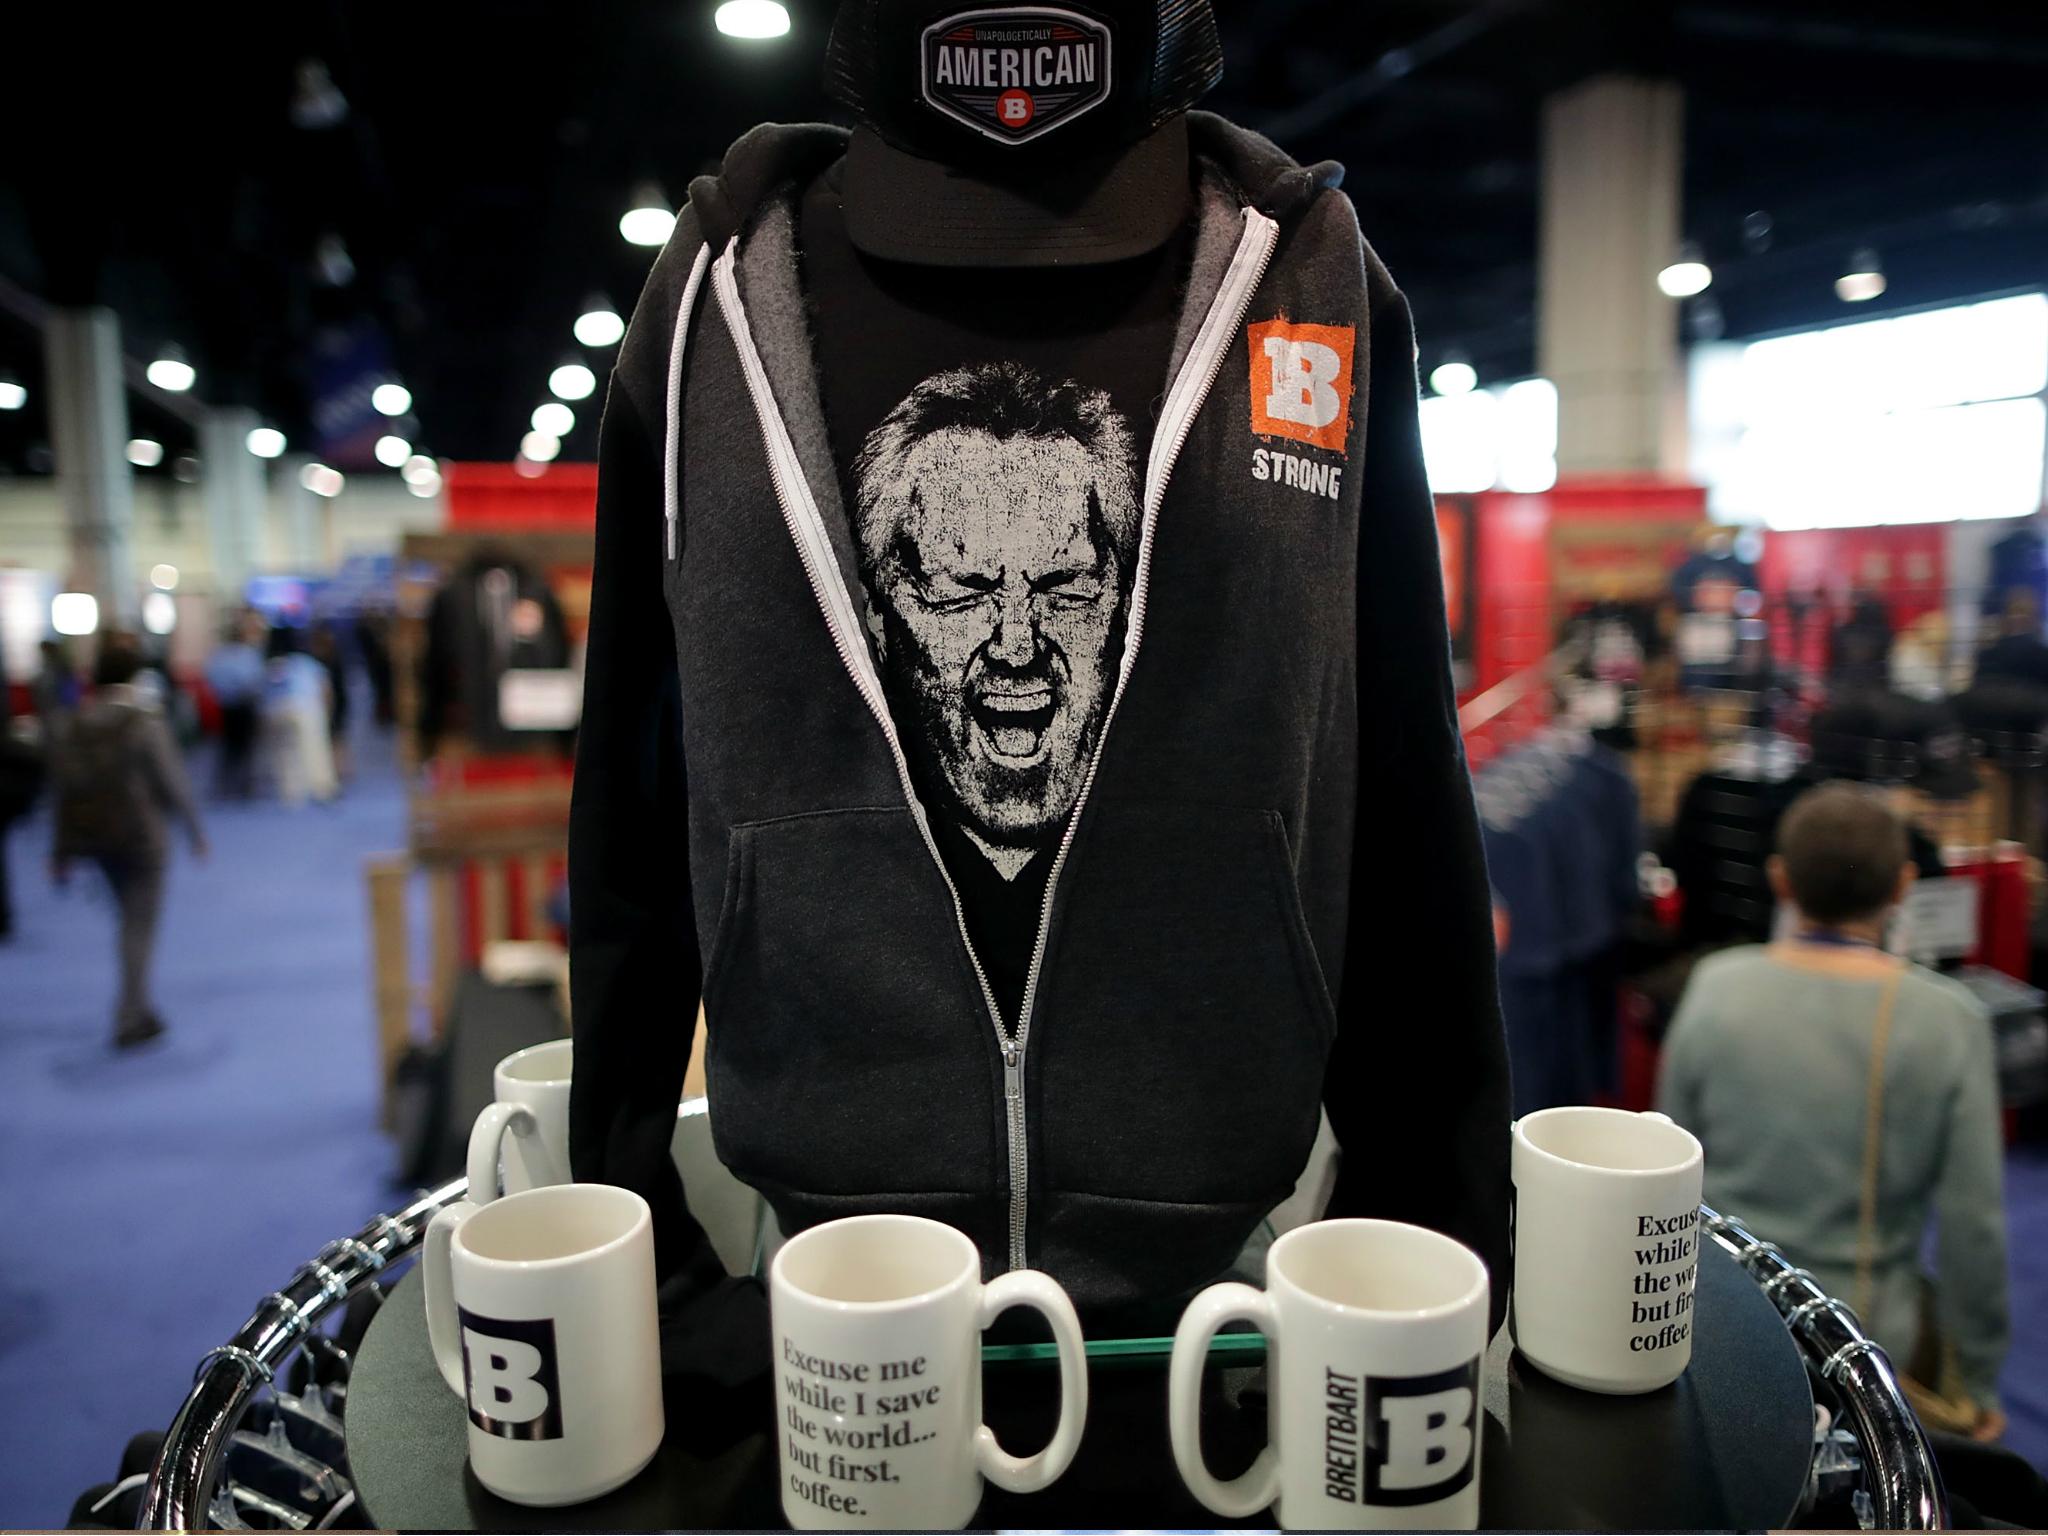 Breitbart News merchandise for sale during the first day of the Conservative Political Action Conference 23 February 2017 in National Harbor, Maryland.